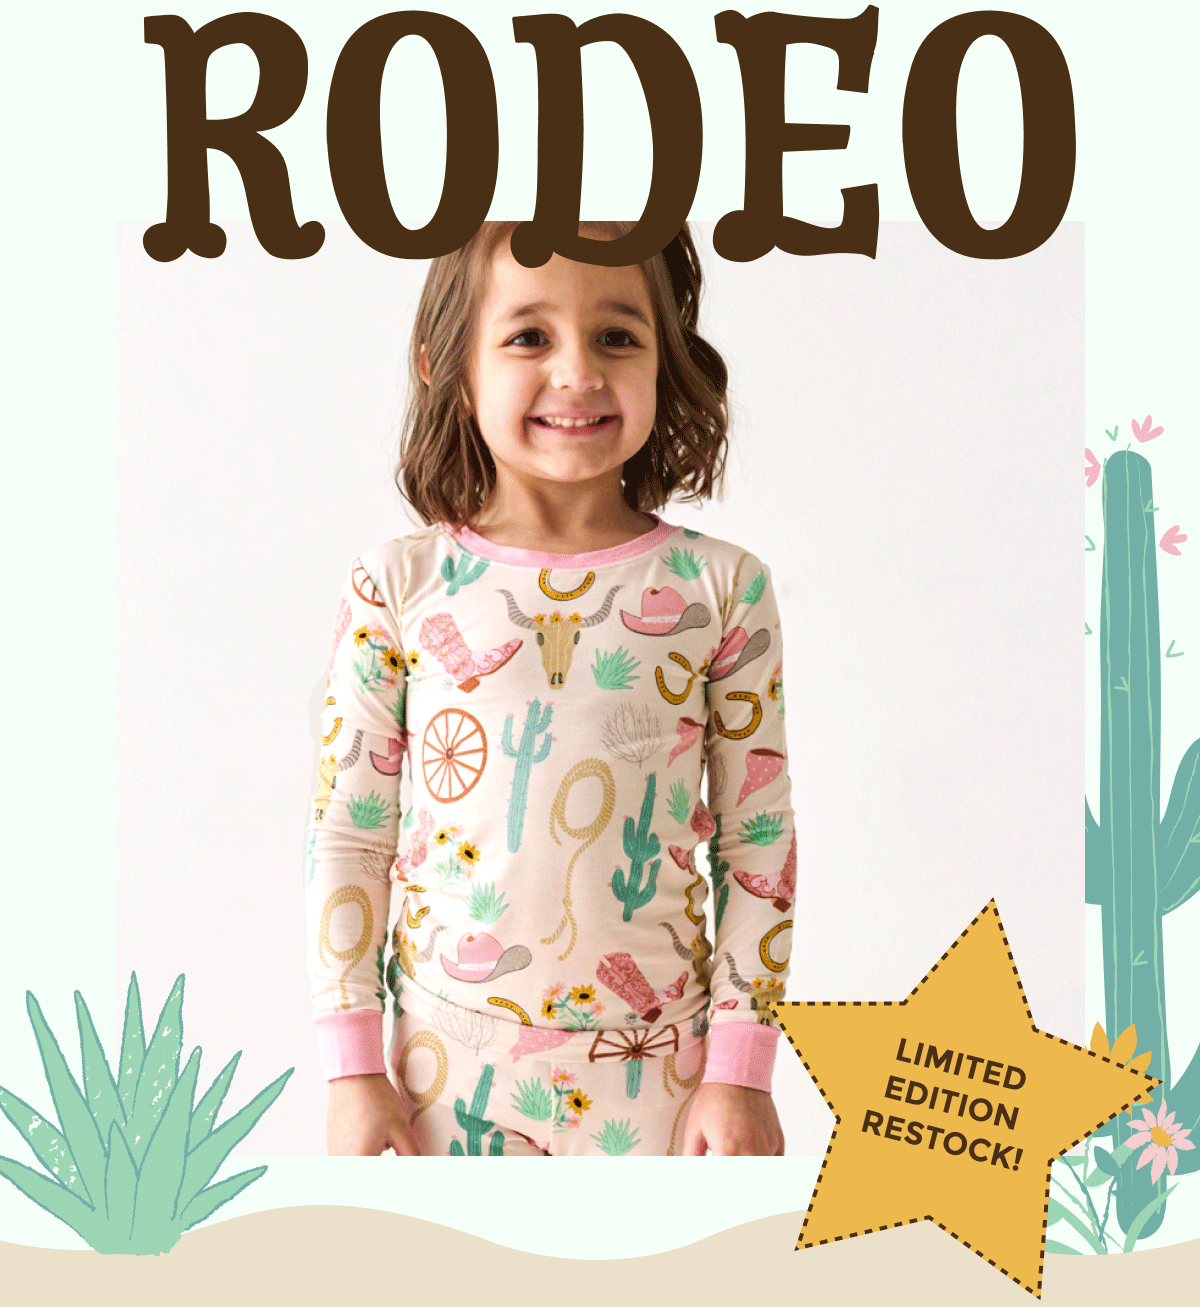 RODEO | LIMITED EDITION RESTOCK!